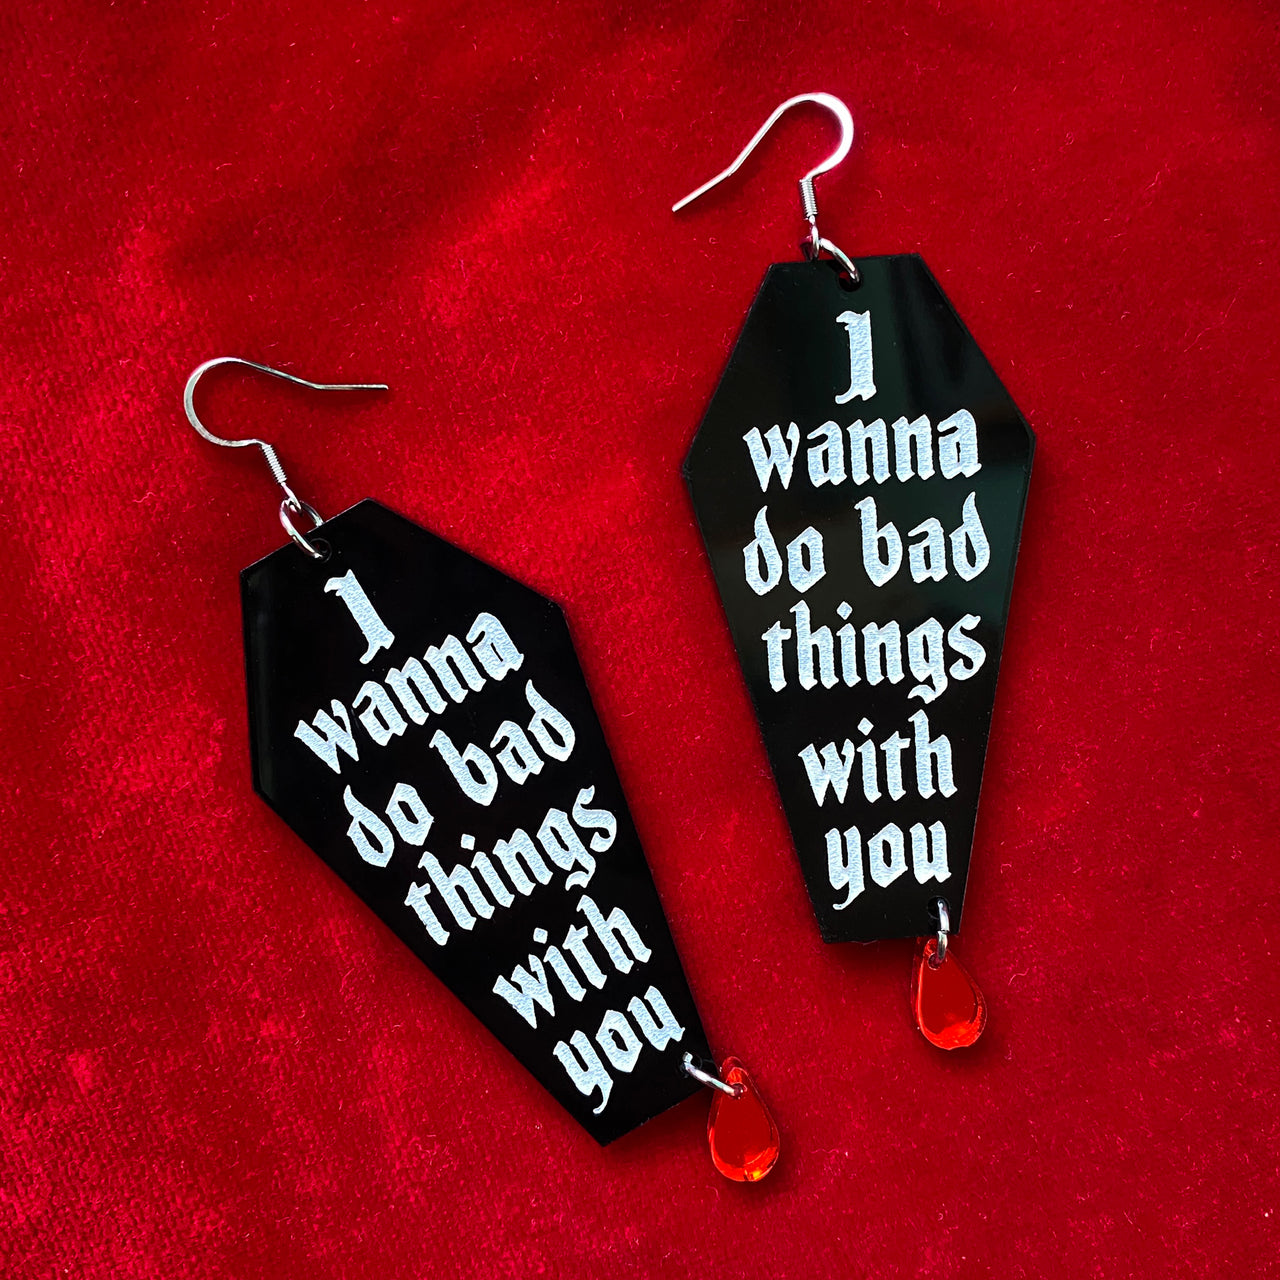 MALA BAD THINGS WITH YOU COFFIN EARRINGS